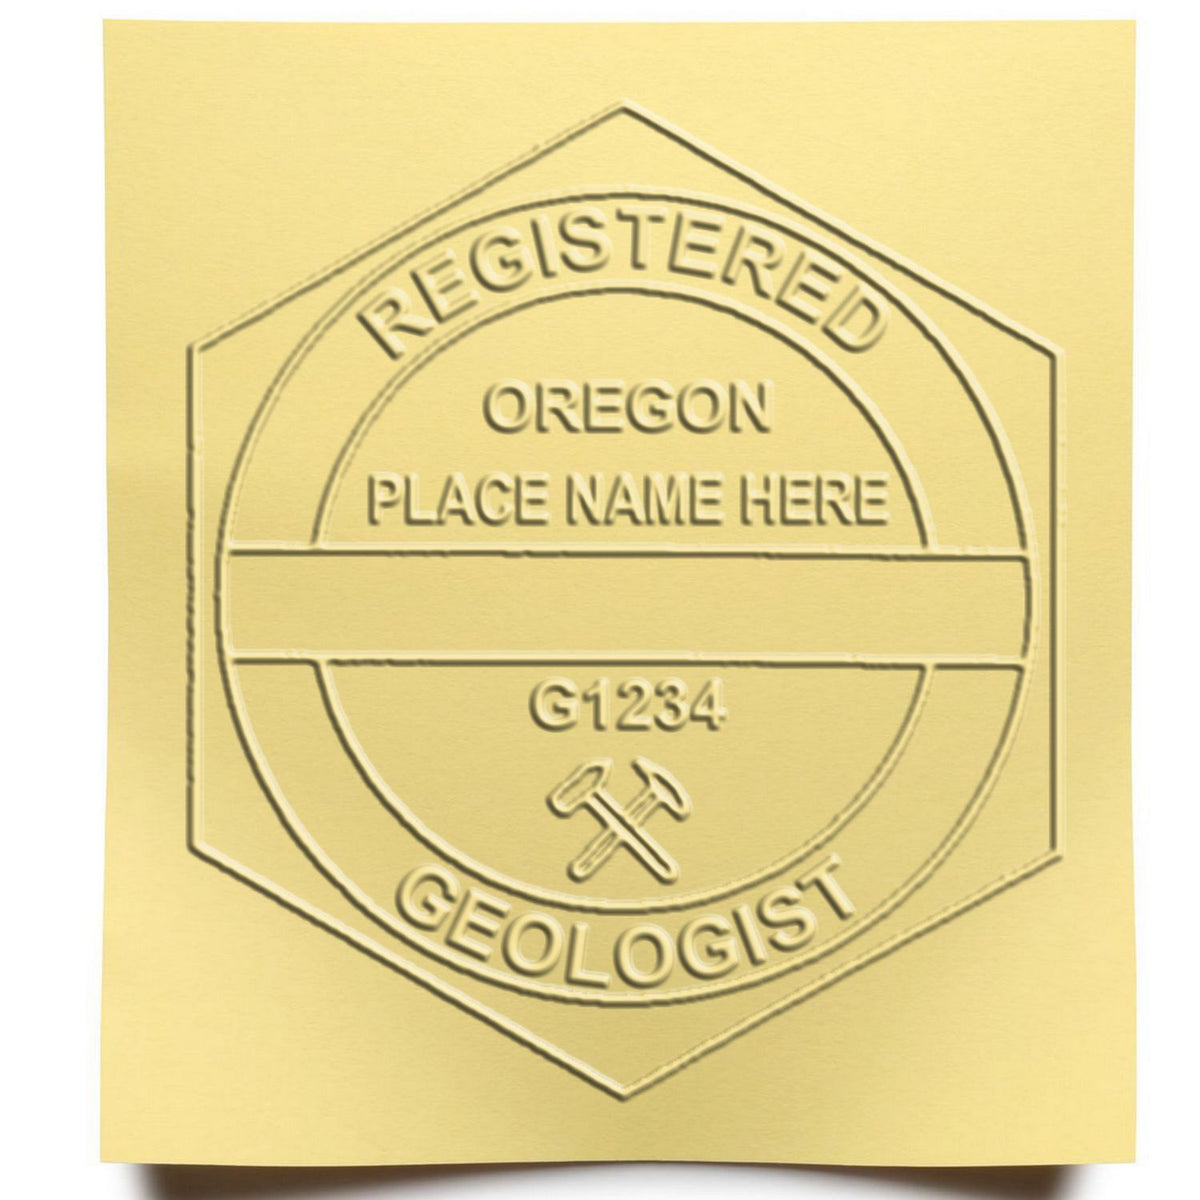 An in use photo of the Gift Oregon Geologist Seal showing a sample imprint on a cardstock